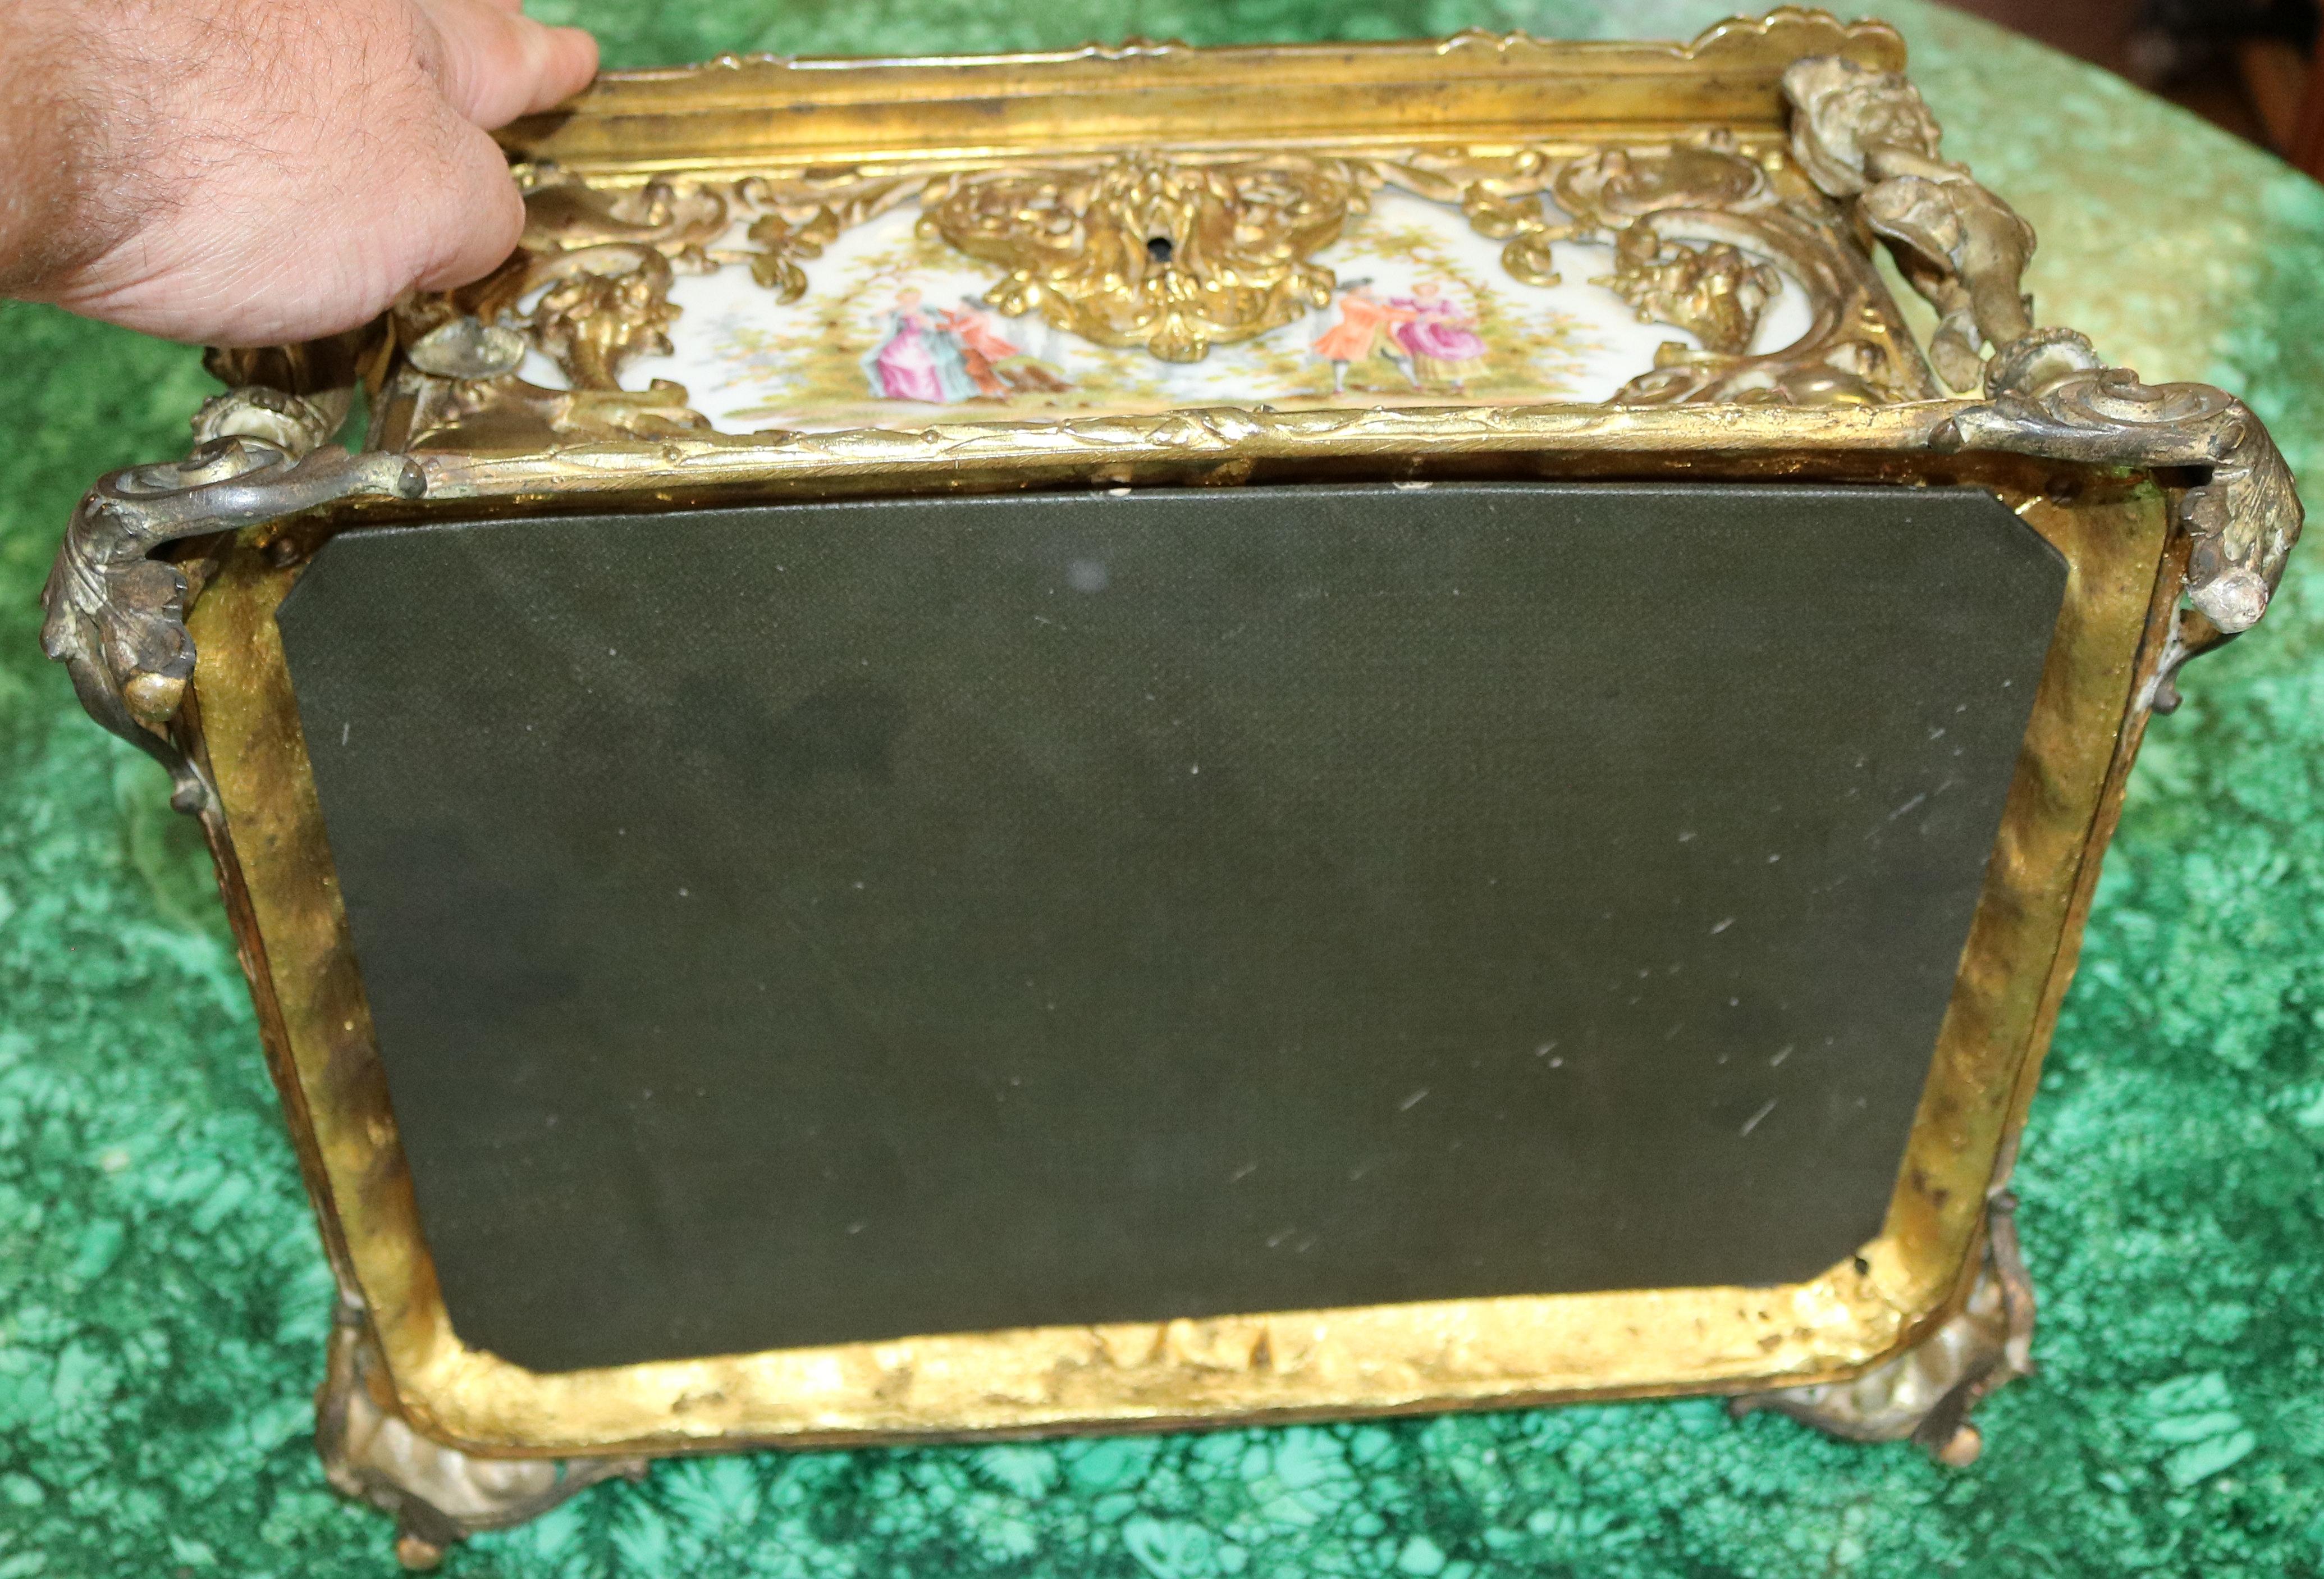 Outstanding Large 19th Century Bronze & Porcelain Jewelry Casket Box For Sale 11